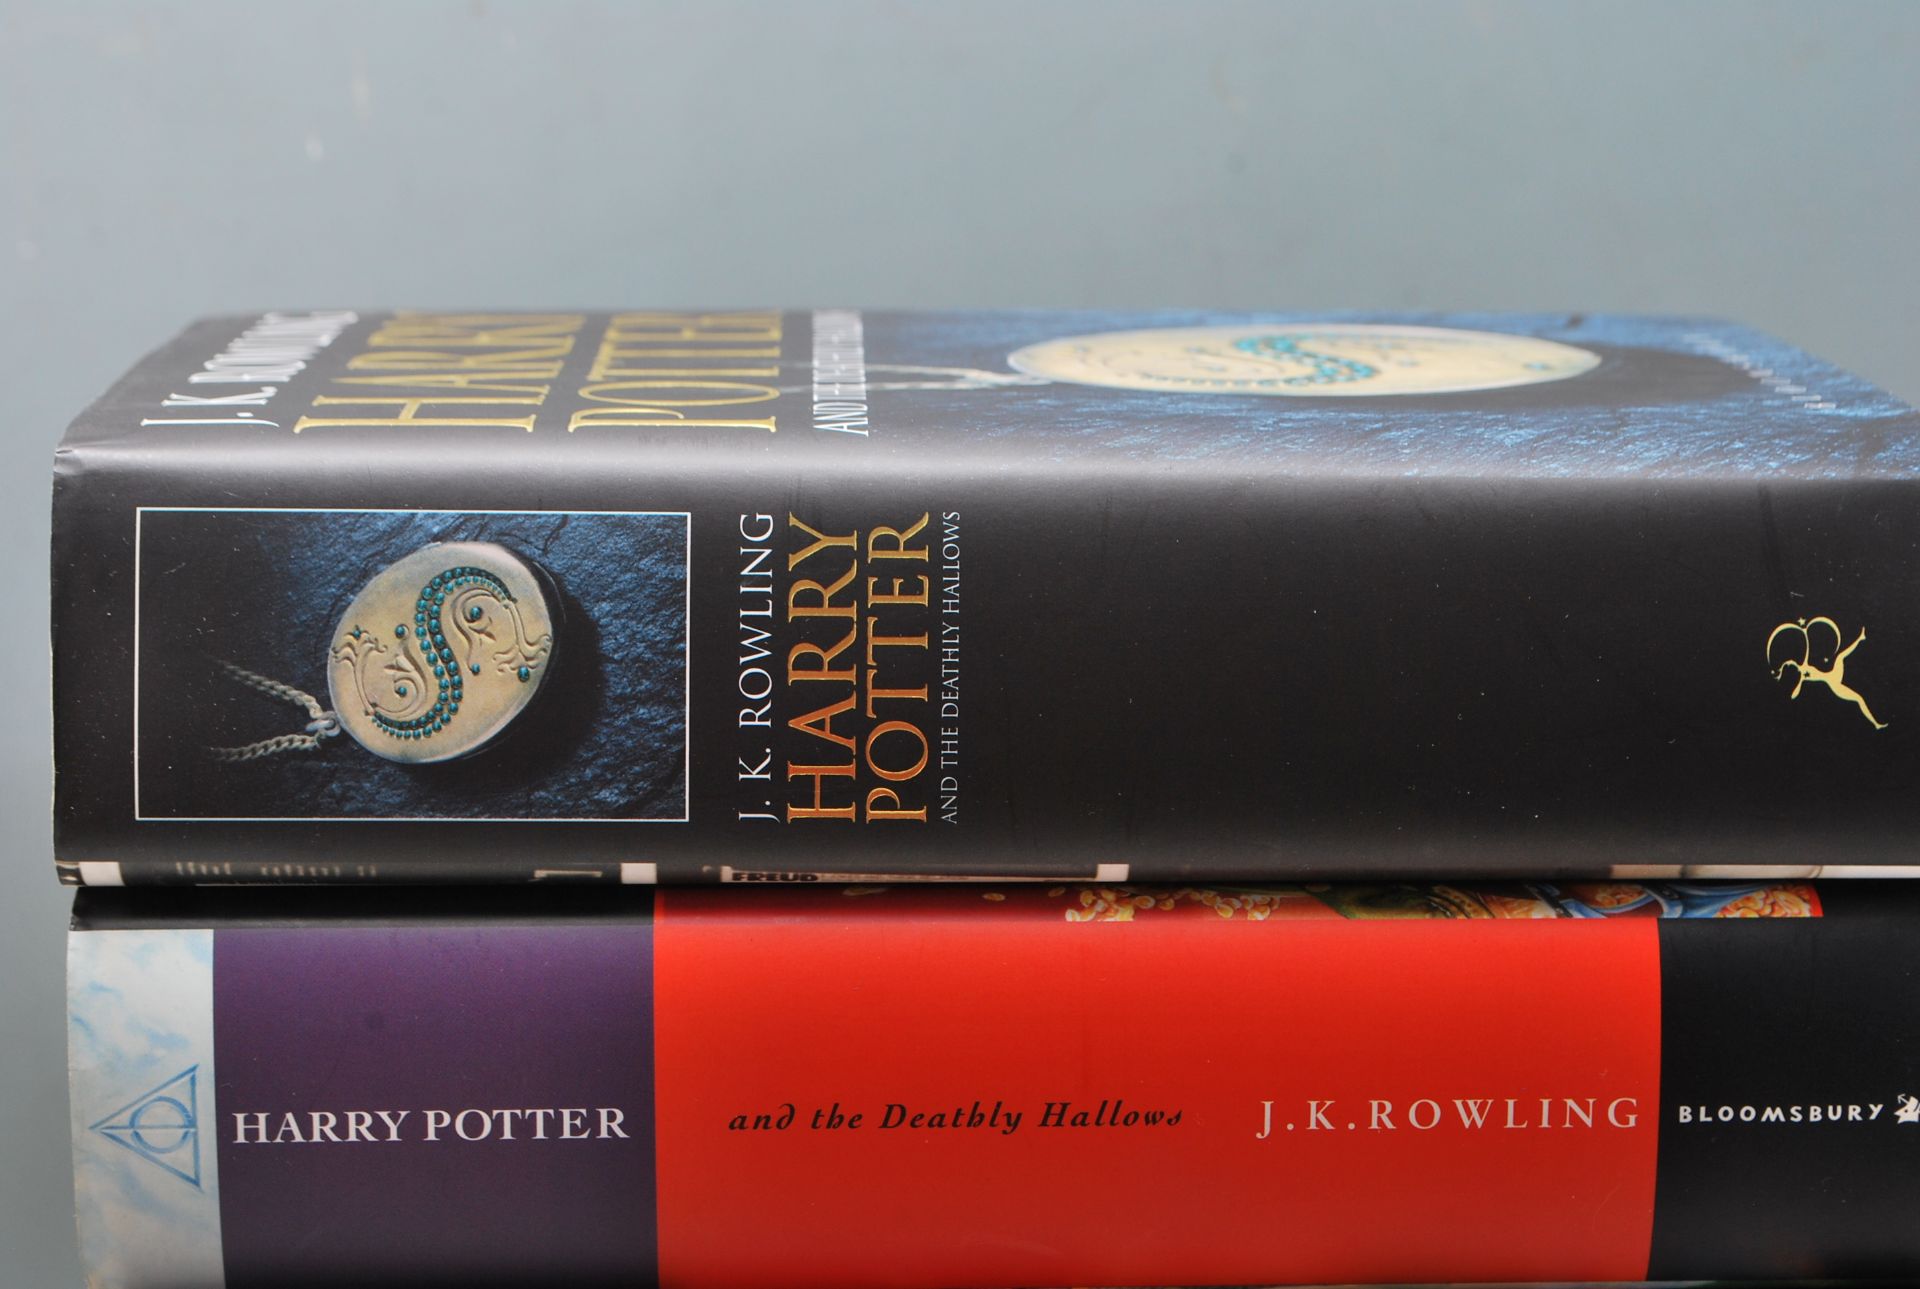 HARRY POTTER - J.K. ROWLING - FIRST EDITION BOOKS - BLOOMSBURY - Image 4 of 7